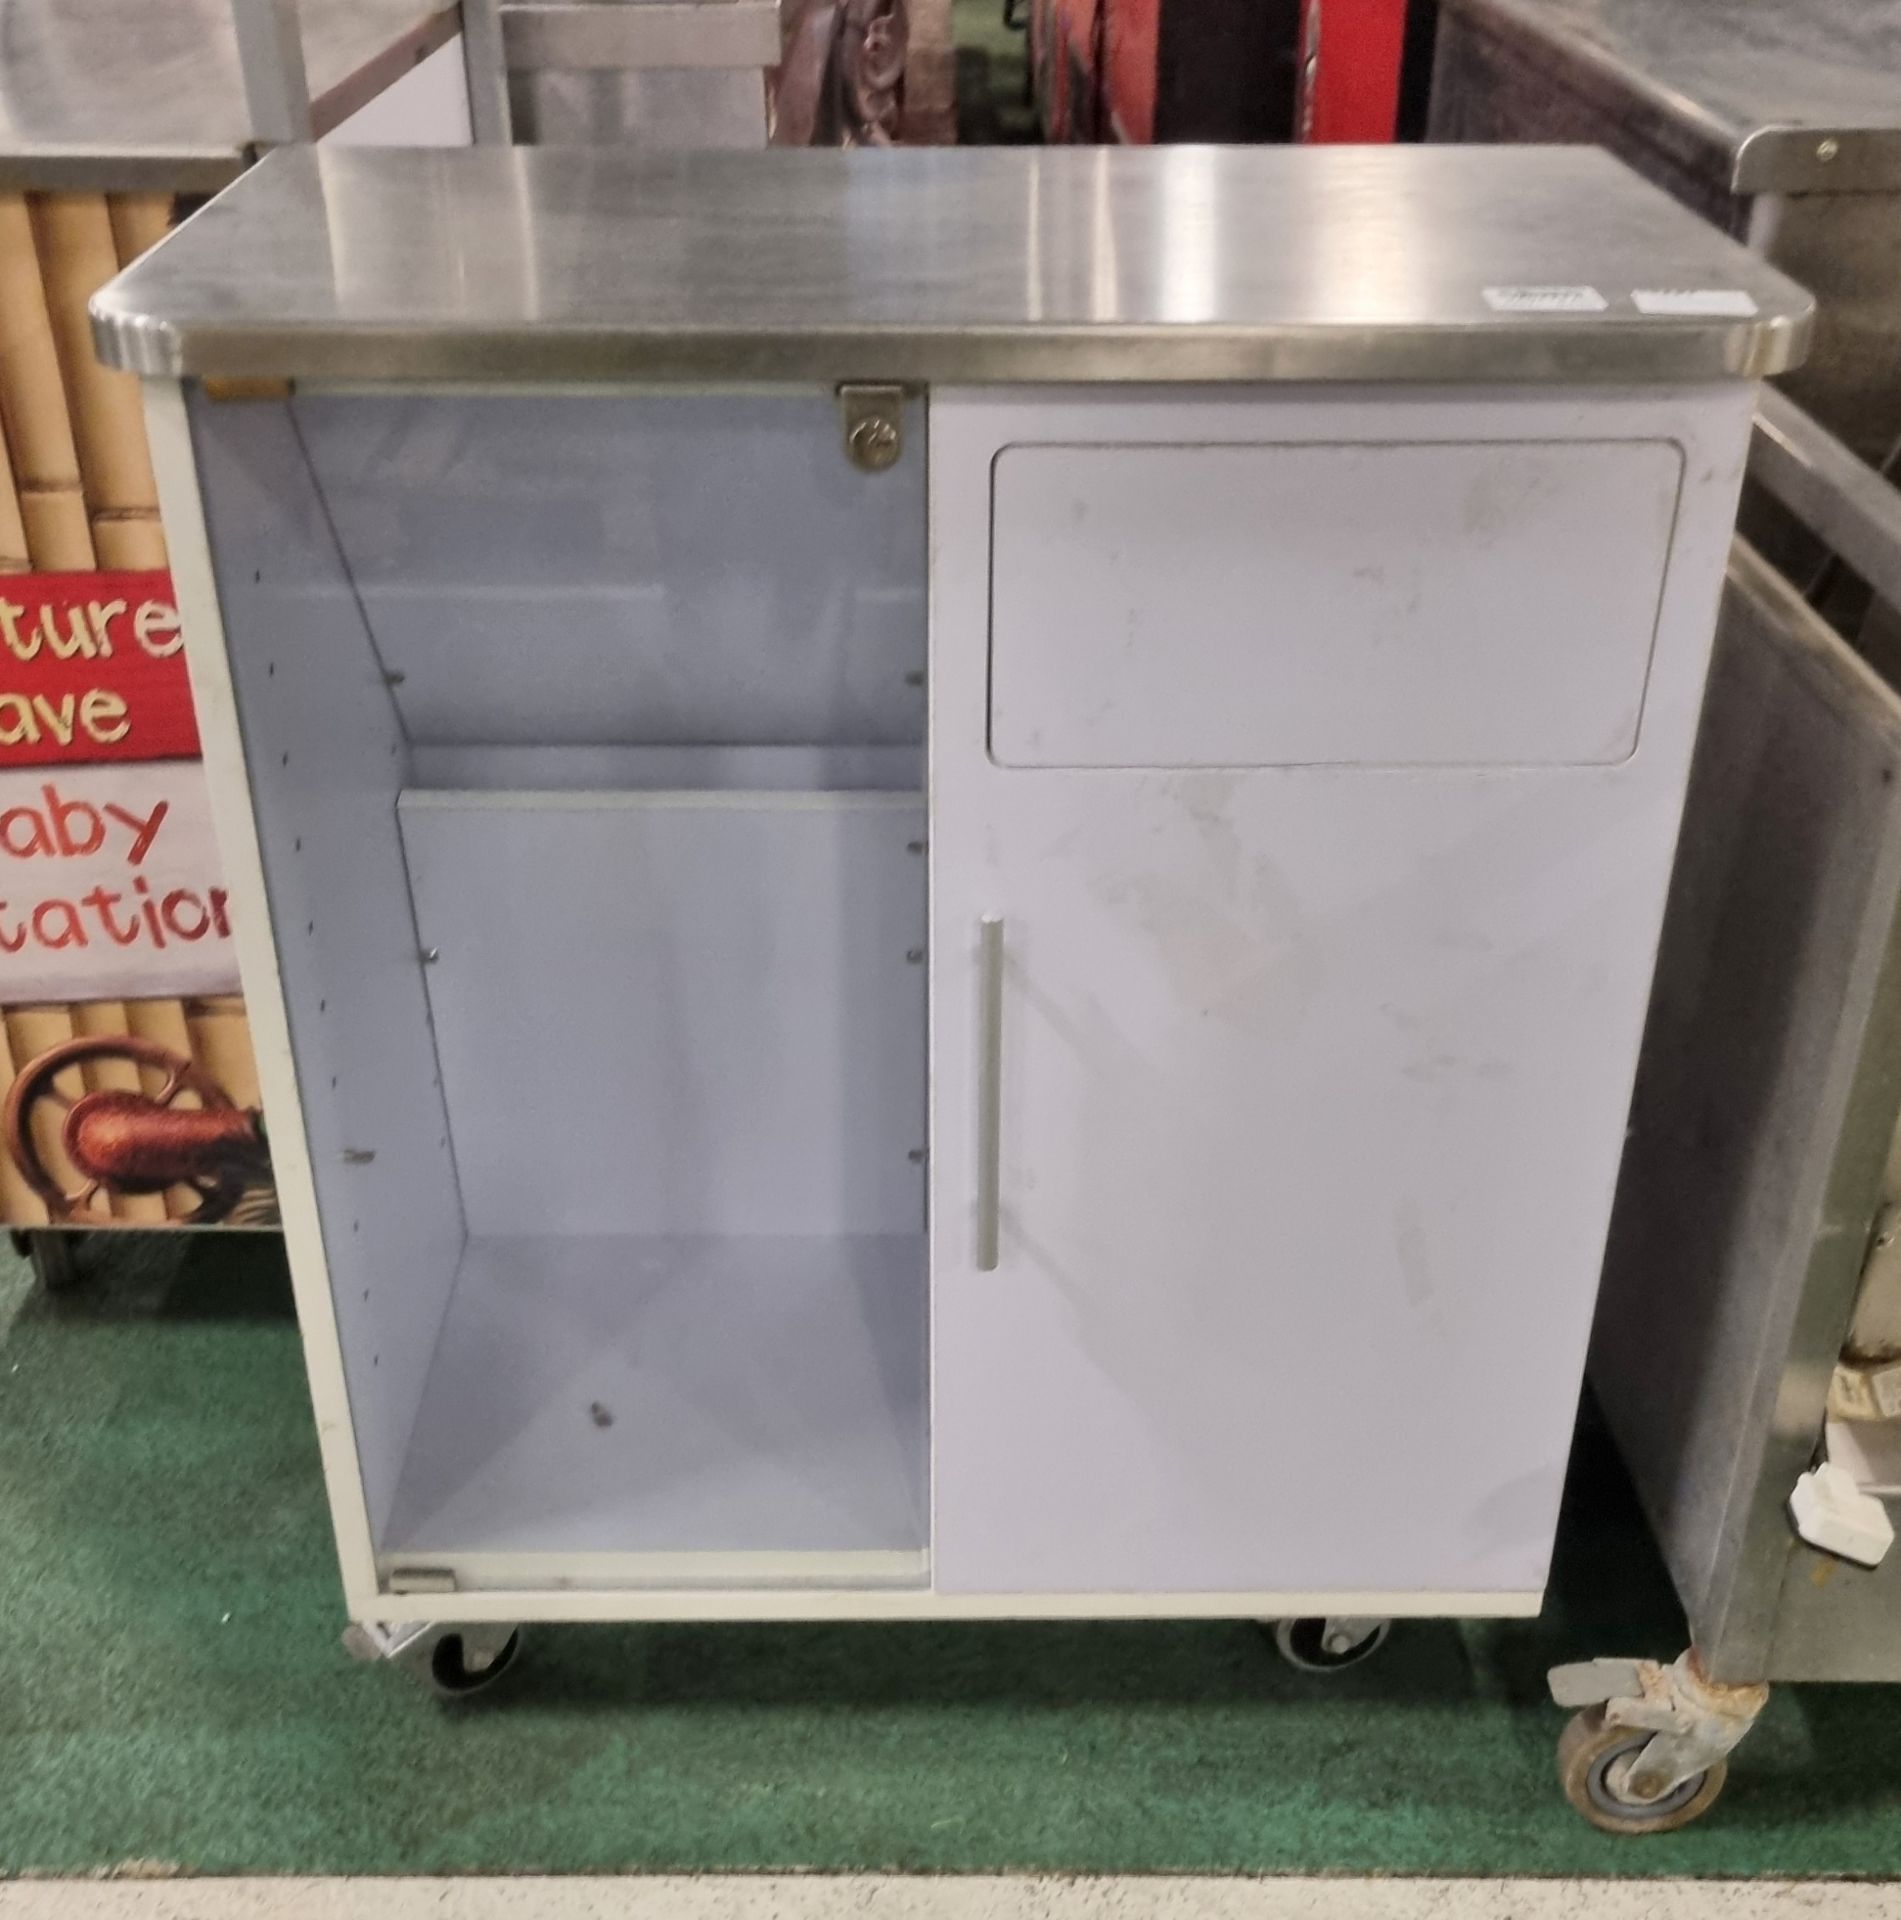 Mobile double door cabinet with stainless steel top - W 800 x D 450 x H 910mm